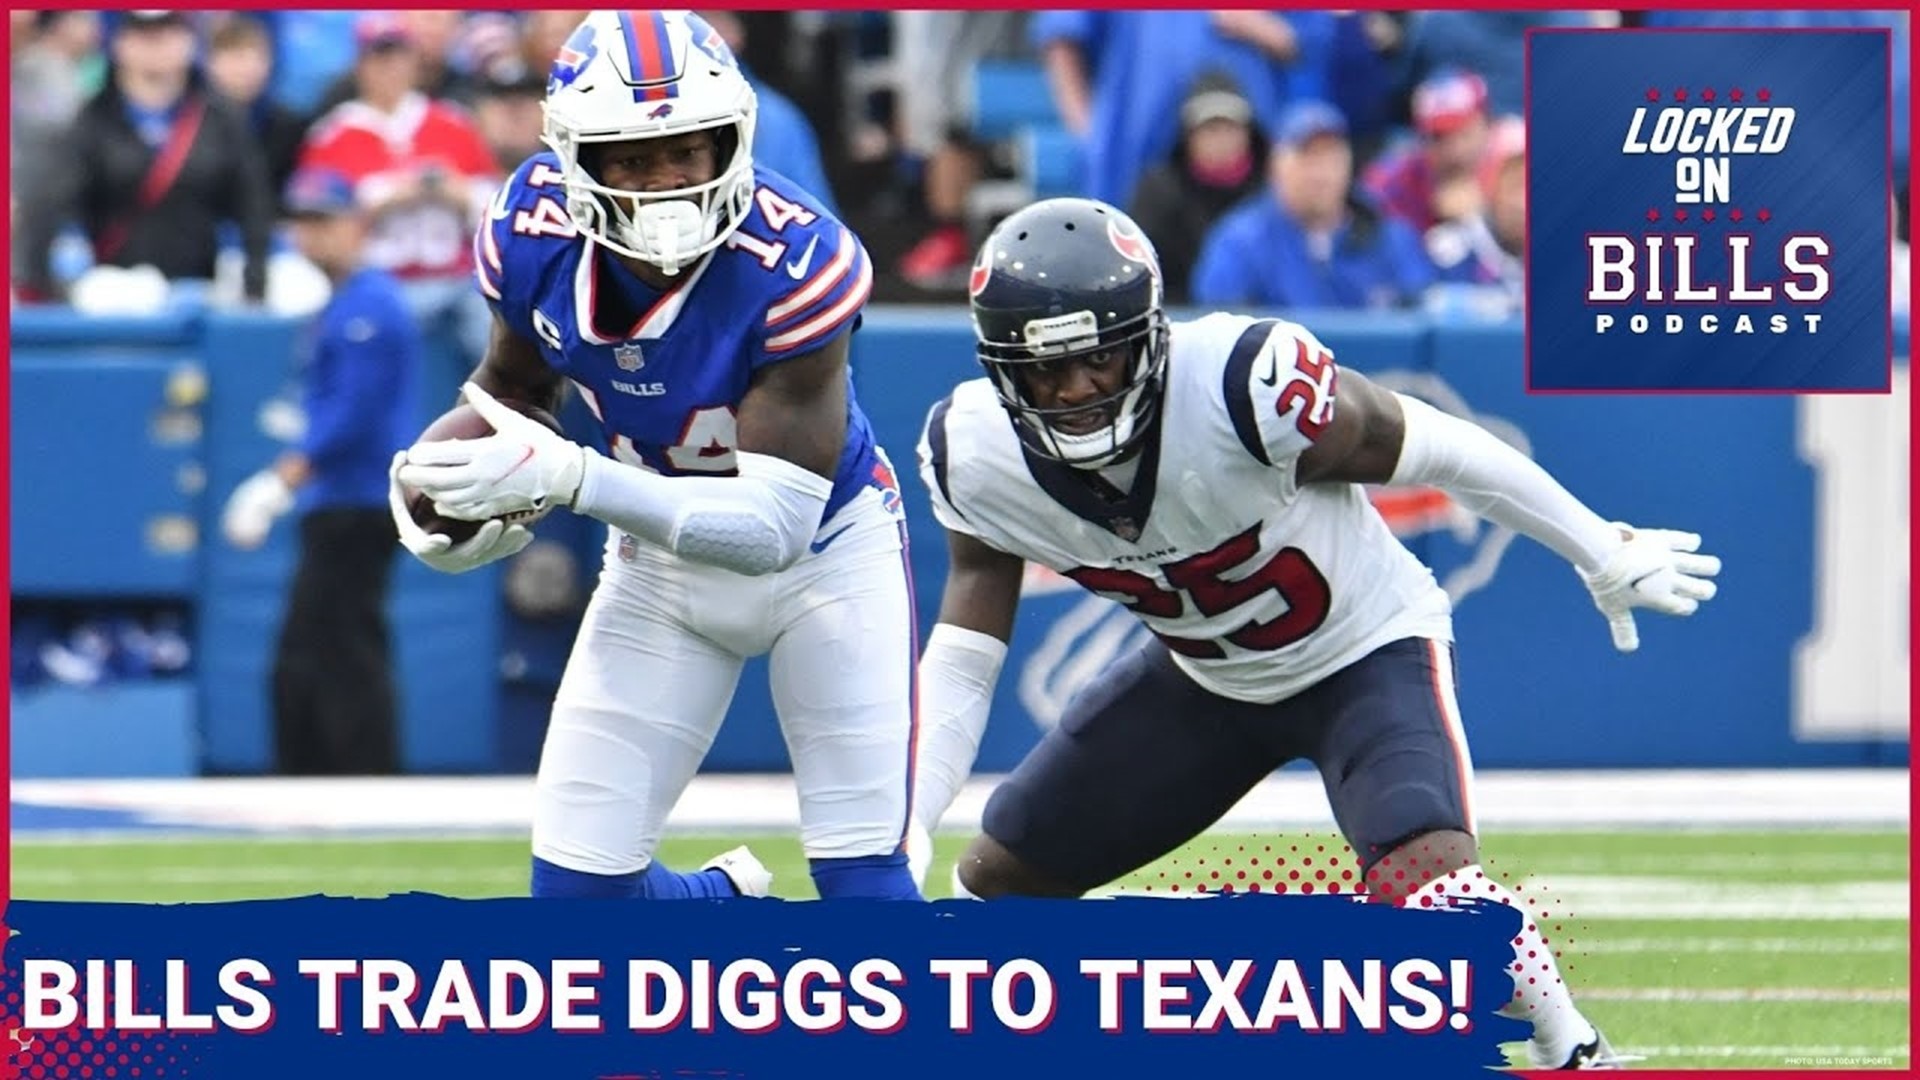 The Buffalo Bills traded WR Stefon Diggs to the Houston Texans in exchange for a 2025 second round pick.